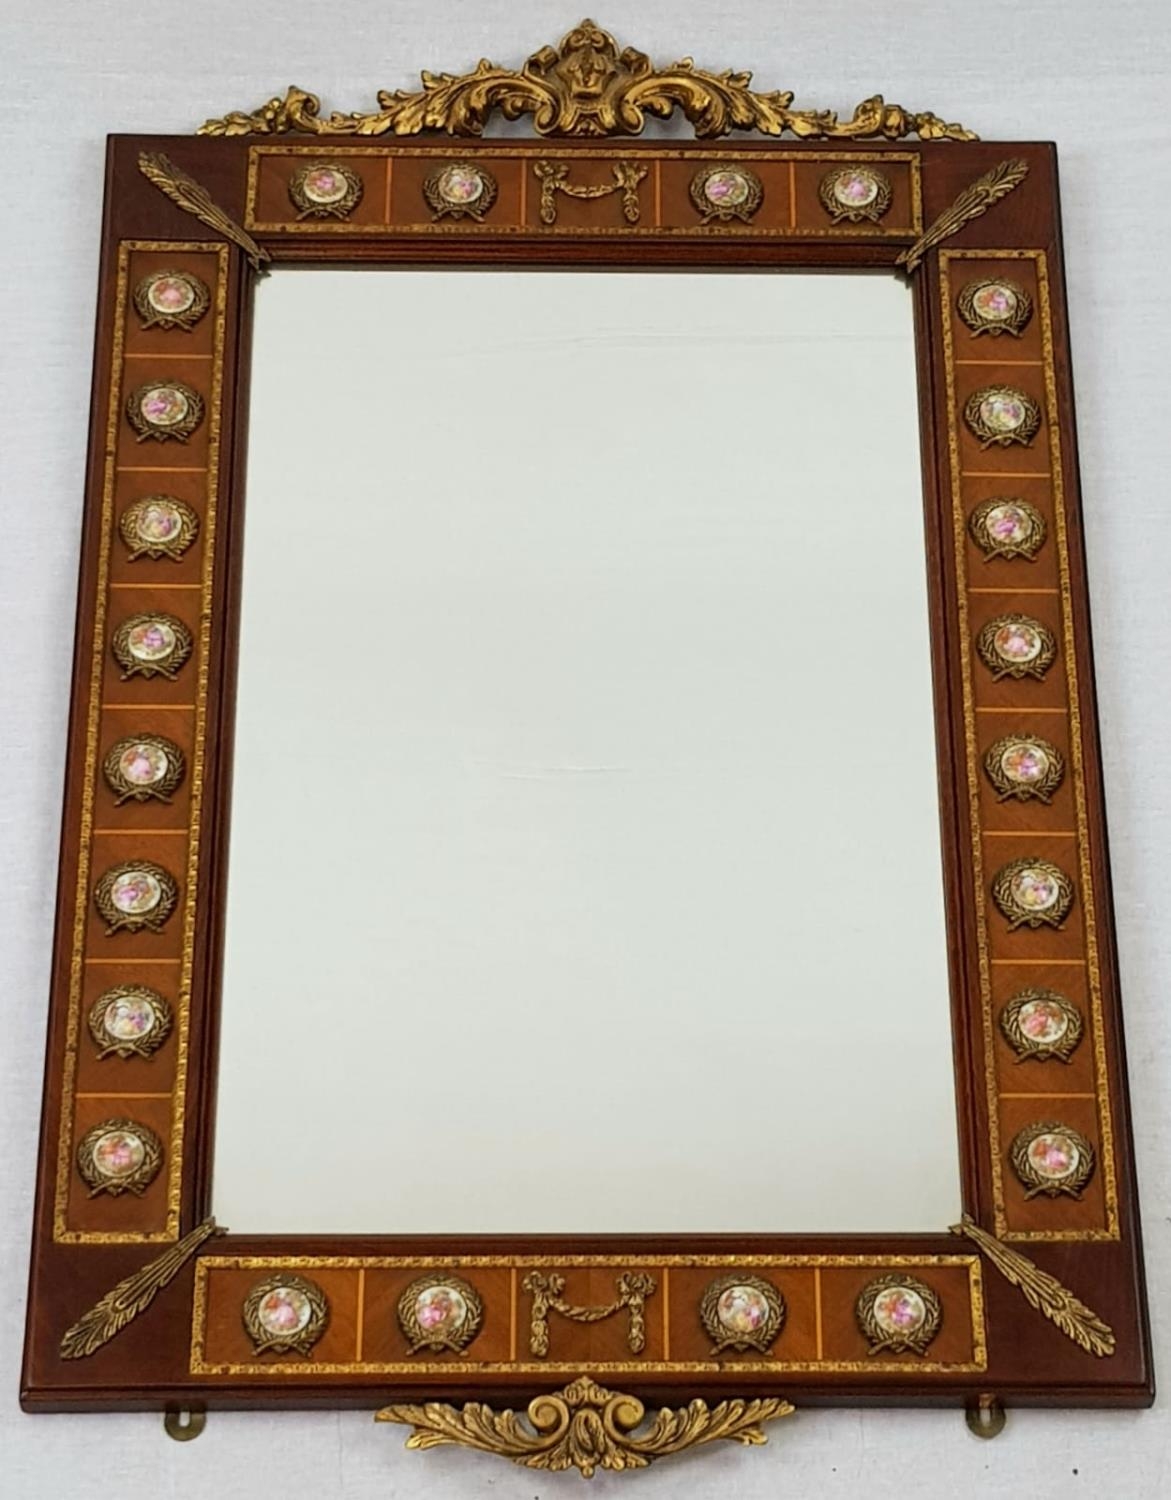 Stunning Large Antique French/Italian Ornate Cameo Porcelain Wall Mirror. Intricate decorative